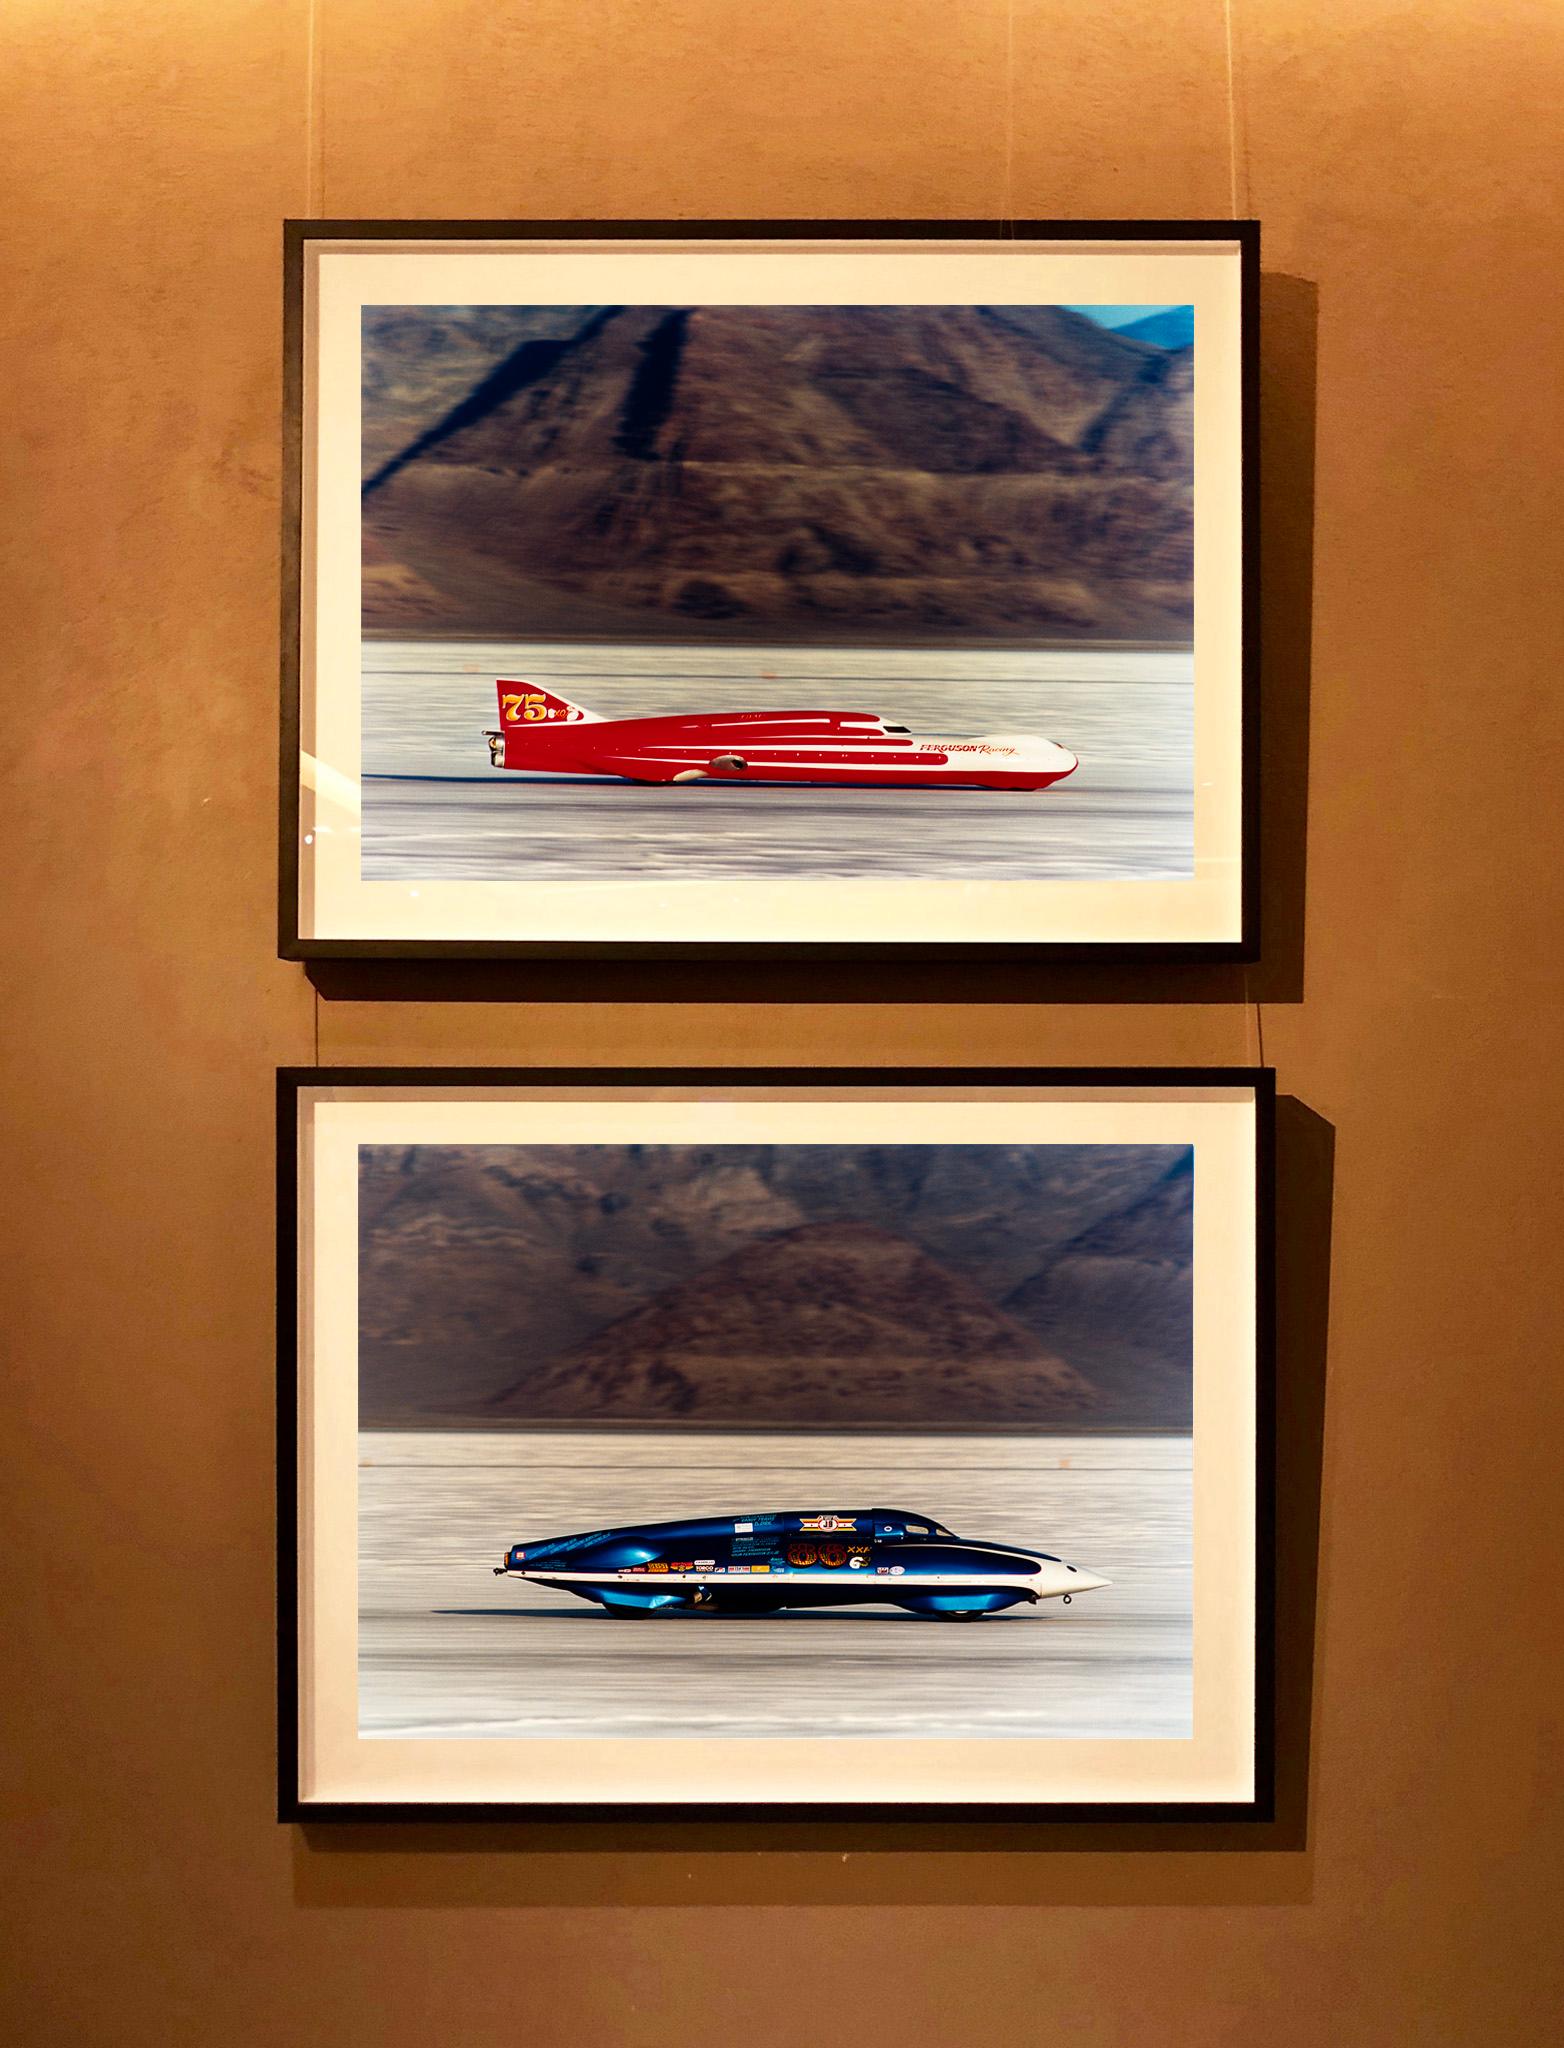 LSR Racing Streamliner, photograph taken in the iconic home of speed, Bonneville Salt Flats, just as the mountains contrast with the flat salt lake, Richard Heeps captured this racing car at high speed contrasting with the still effect of the